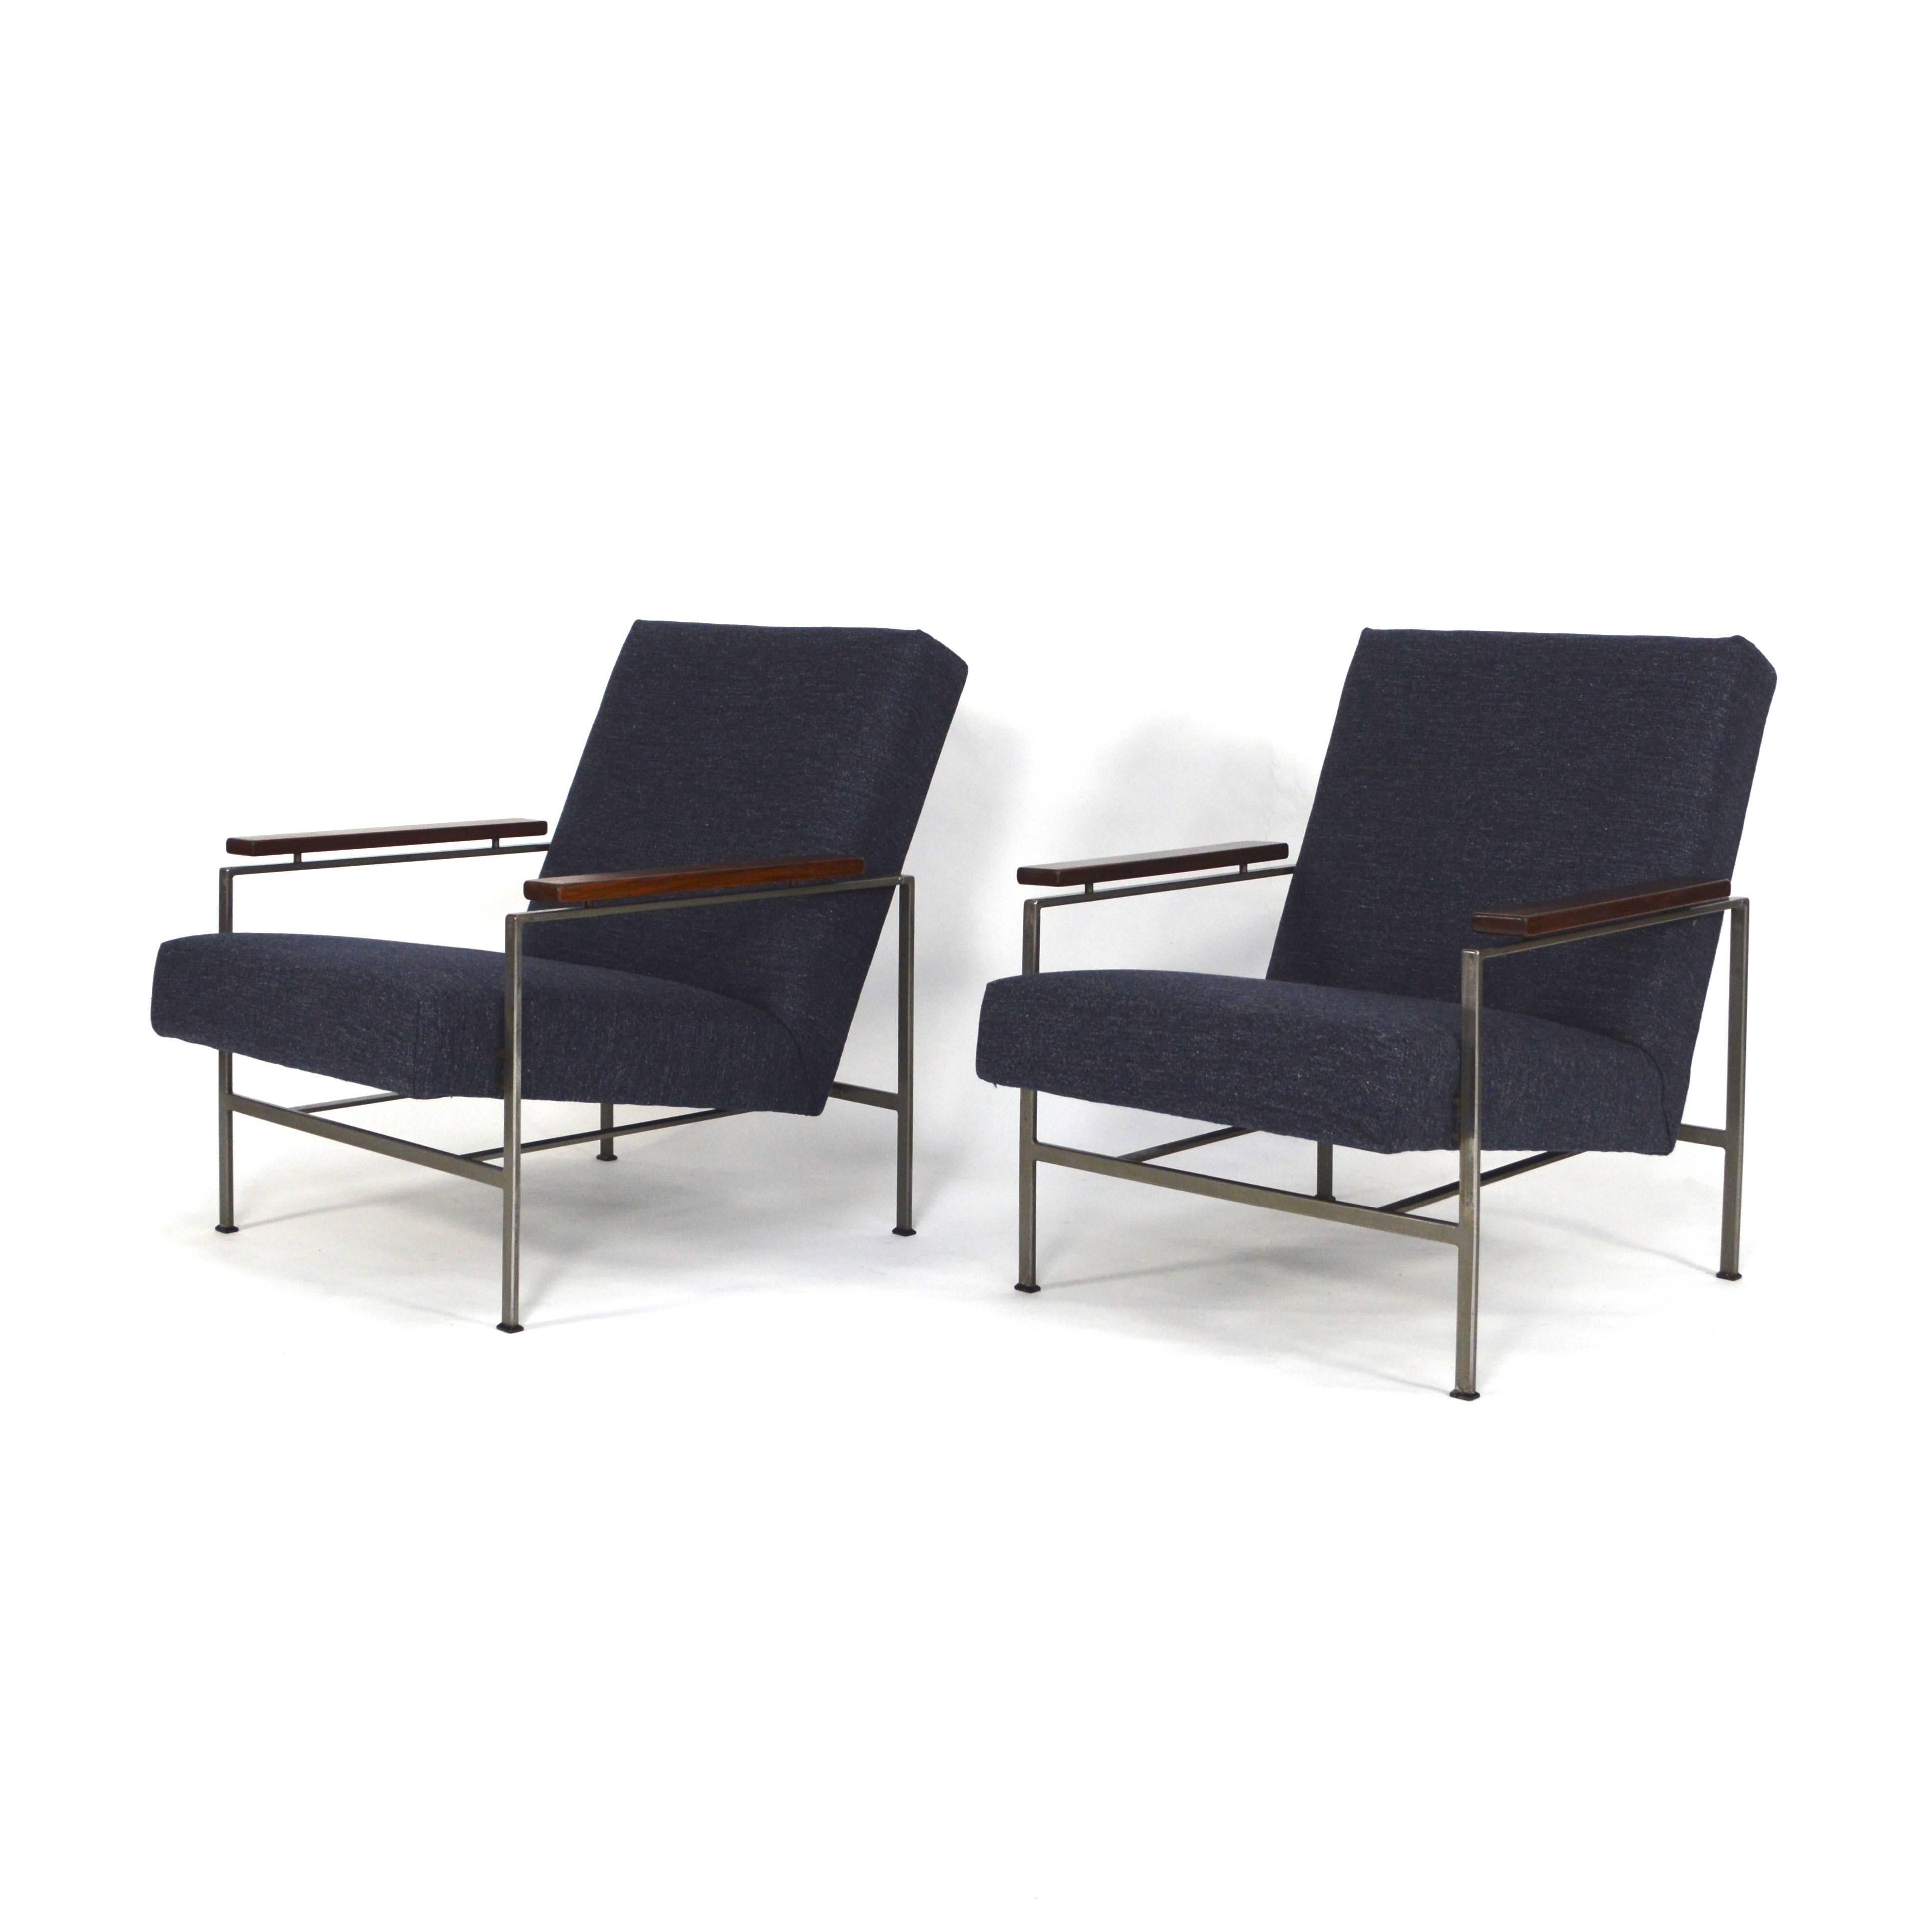 The chairs have been reupholstered with new fabric and foam filling and the solid teak armrests have been restored.
Timeless and modern design from the 1950s.
Rob Parry was a protégée of the famous Dutch designer Gerrit Rietveld.
We offer